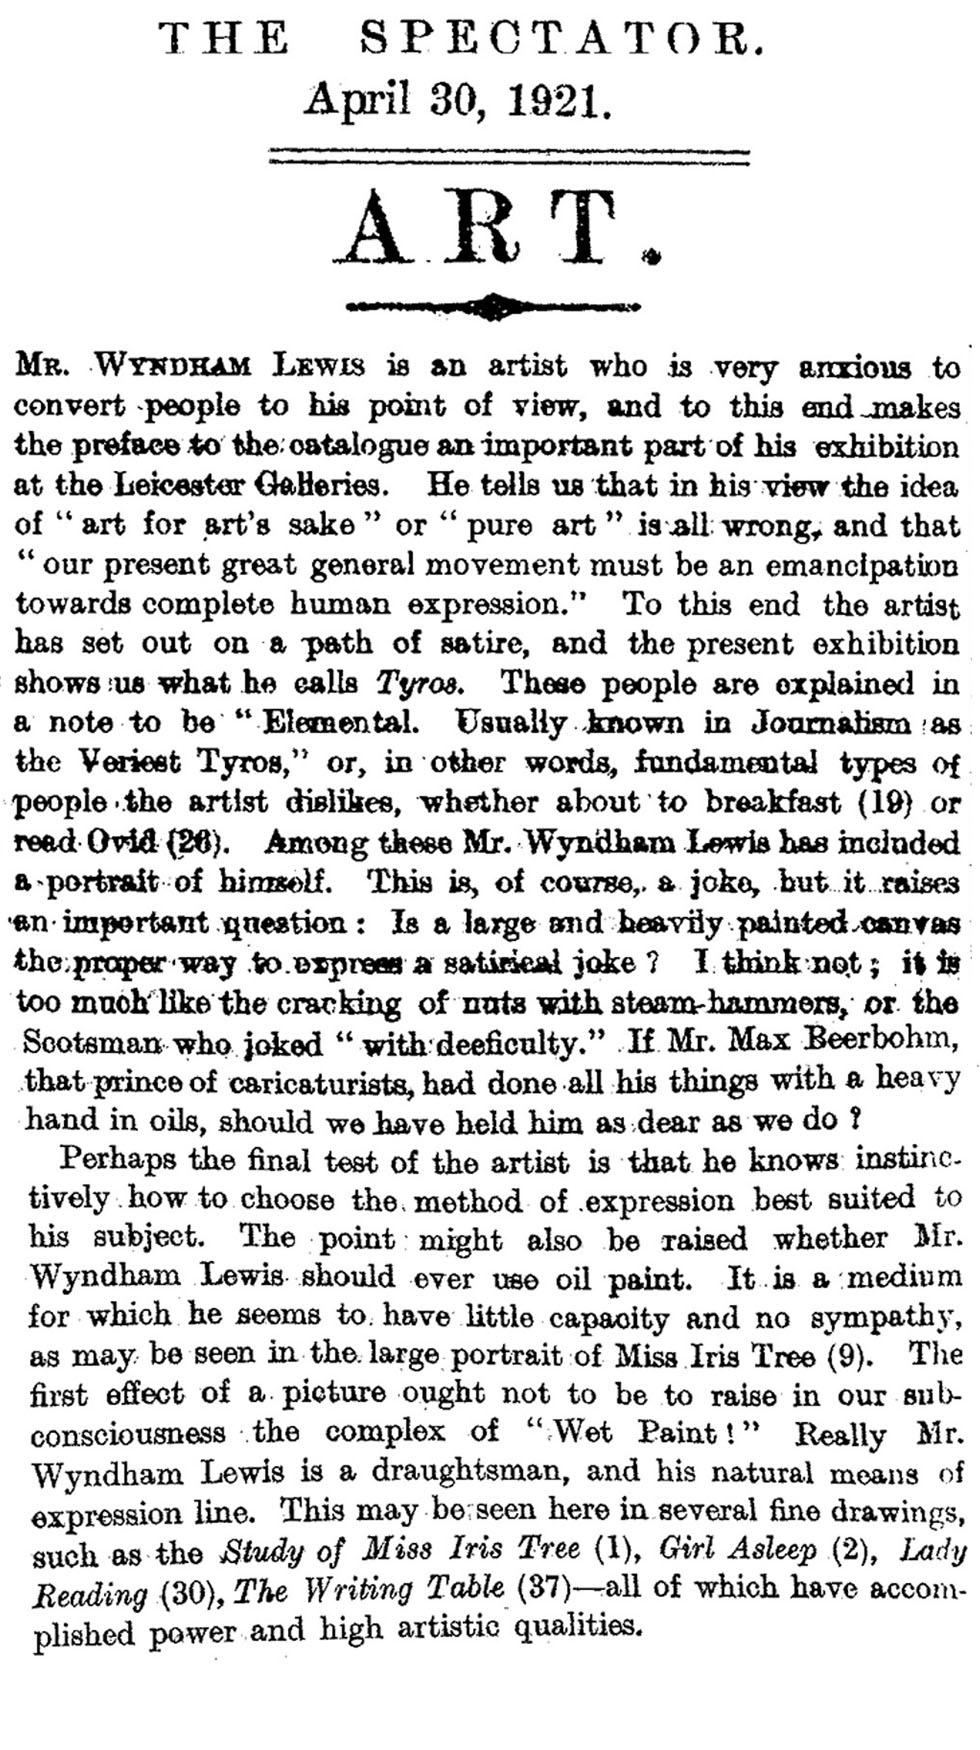 Wyndham Lewis Gets Panned (The Spectator, 1921)